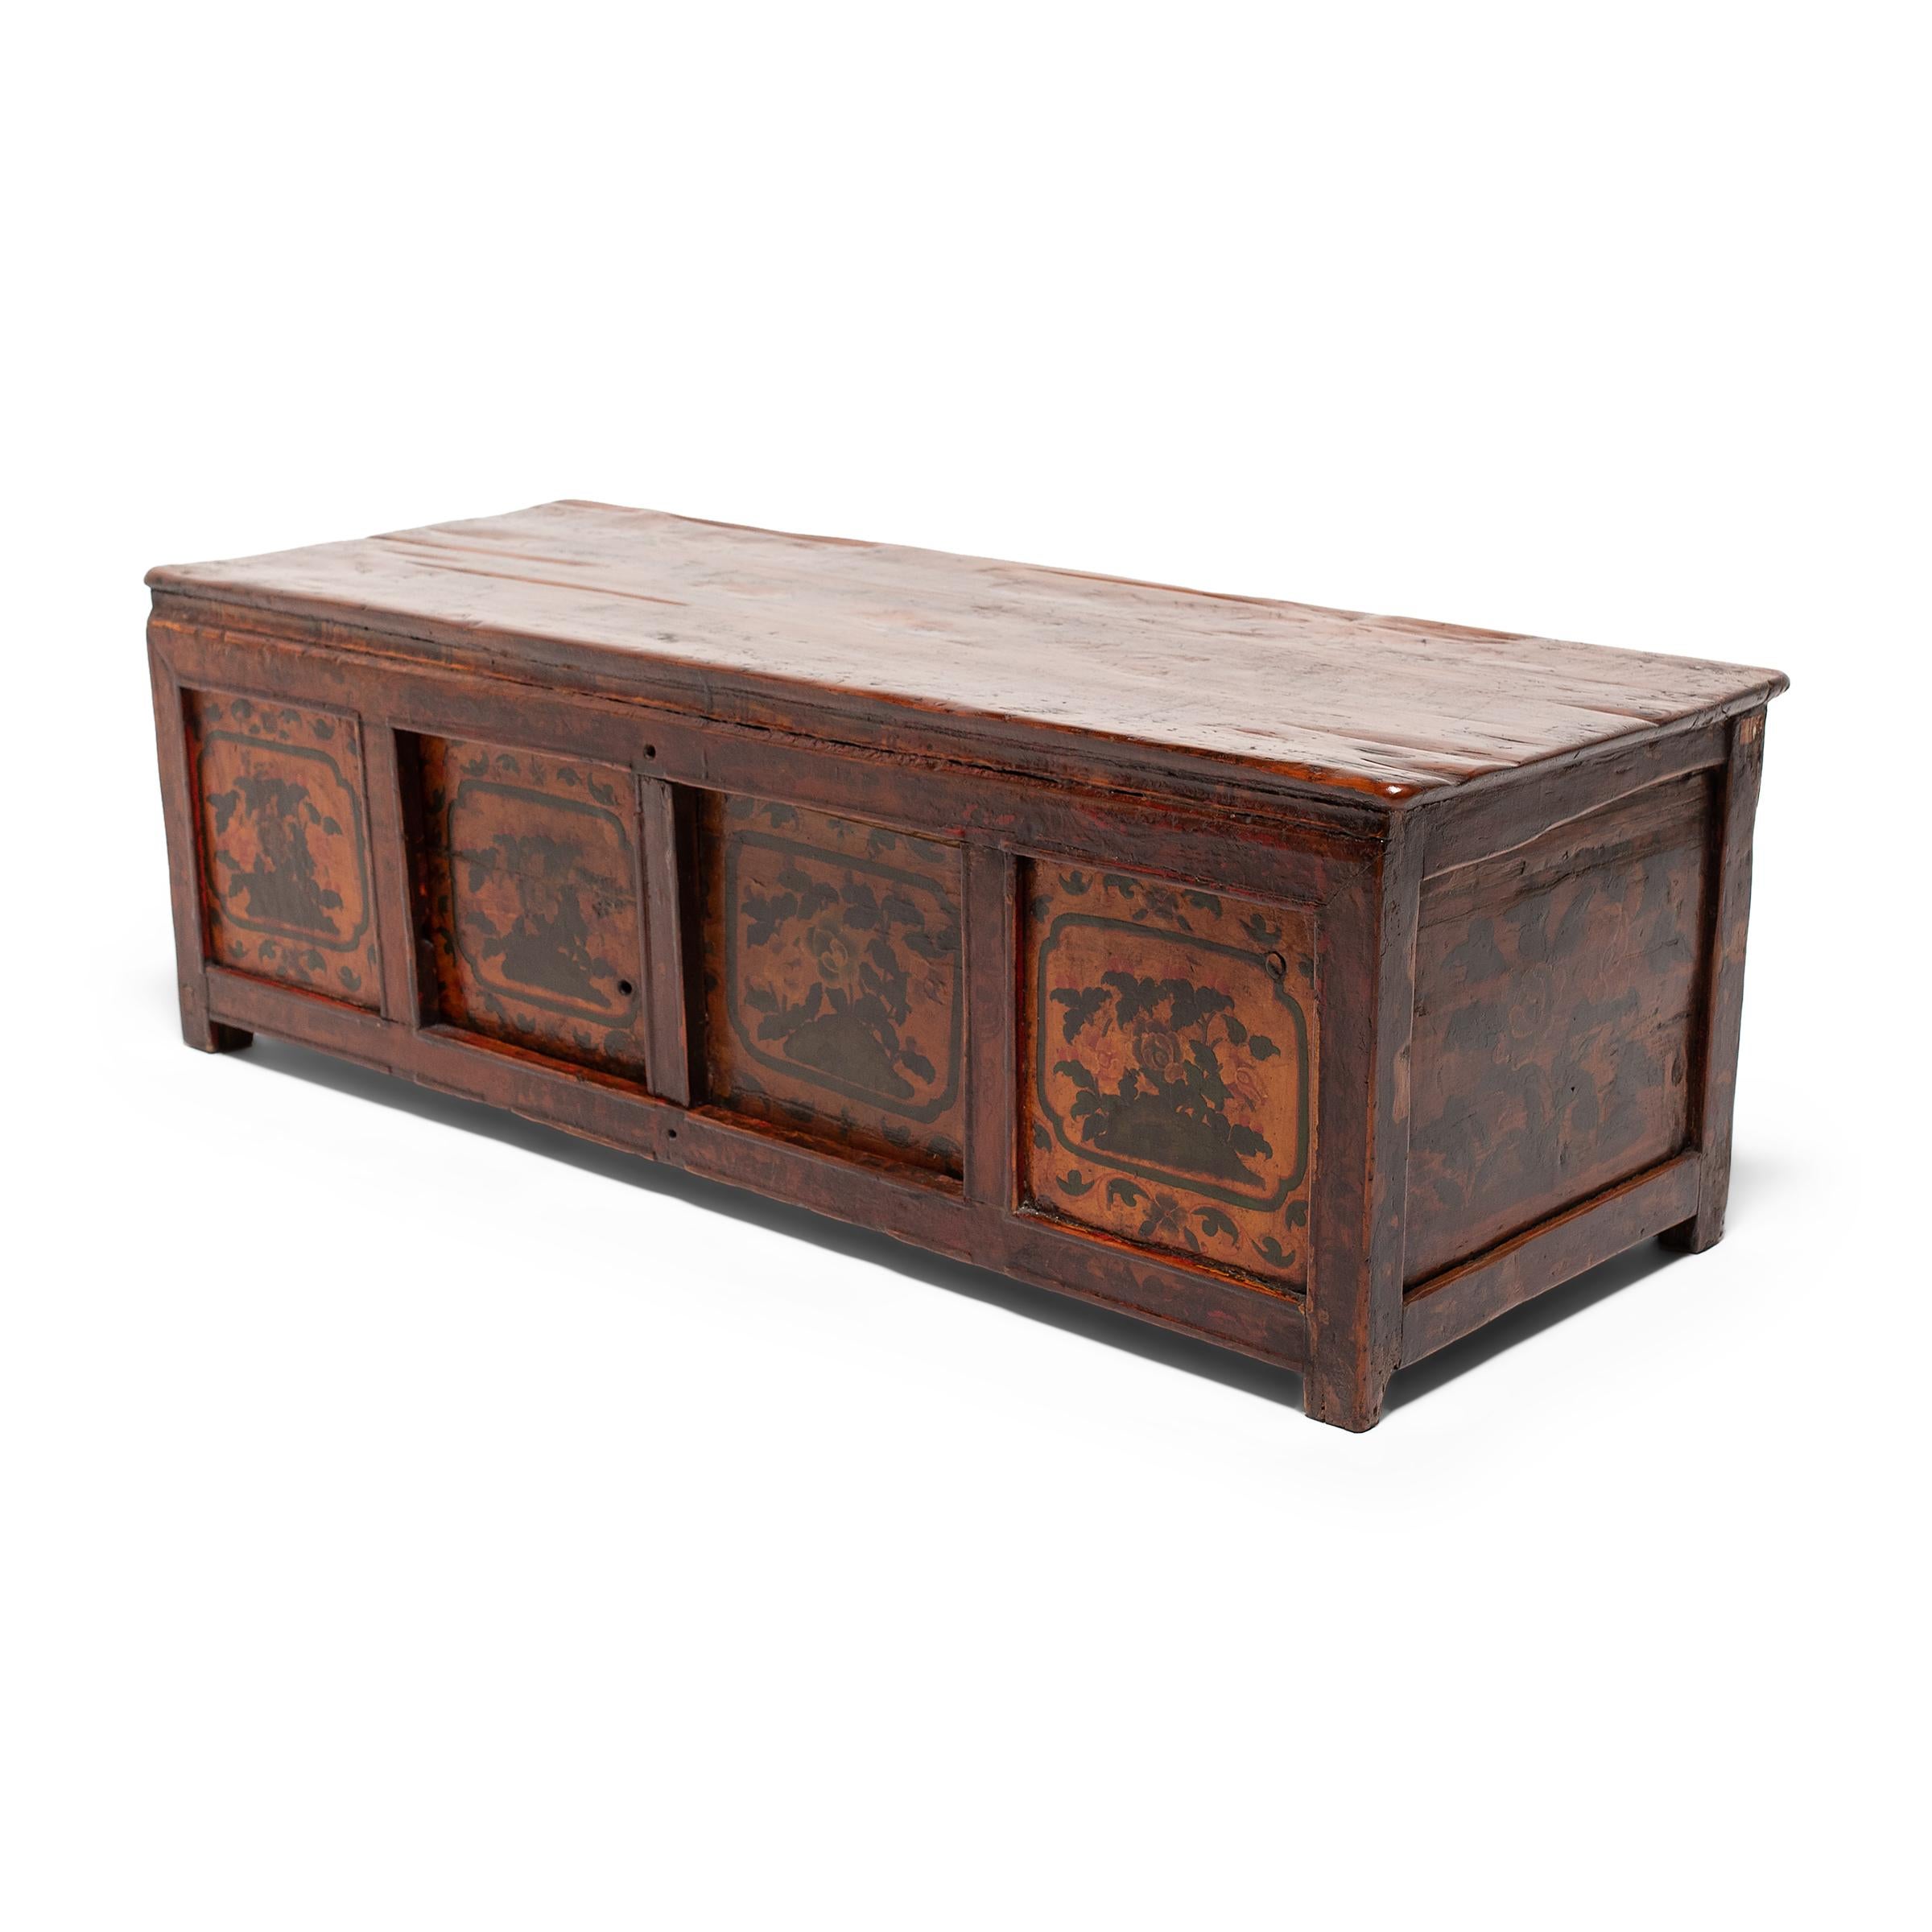 This early 20th century Tibetan painted cabinet would have originally been used atop a kang or platform bed, used as a table and storage chest. The low cabinet has a simple rectangular design with short legs, inset paneled sides, and a slightly